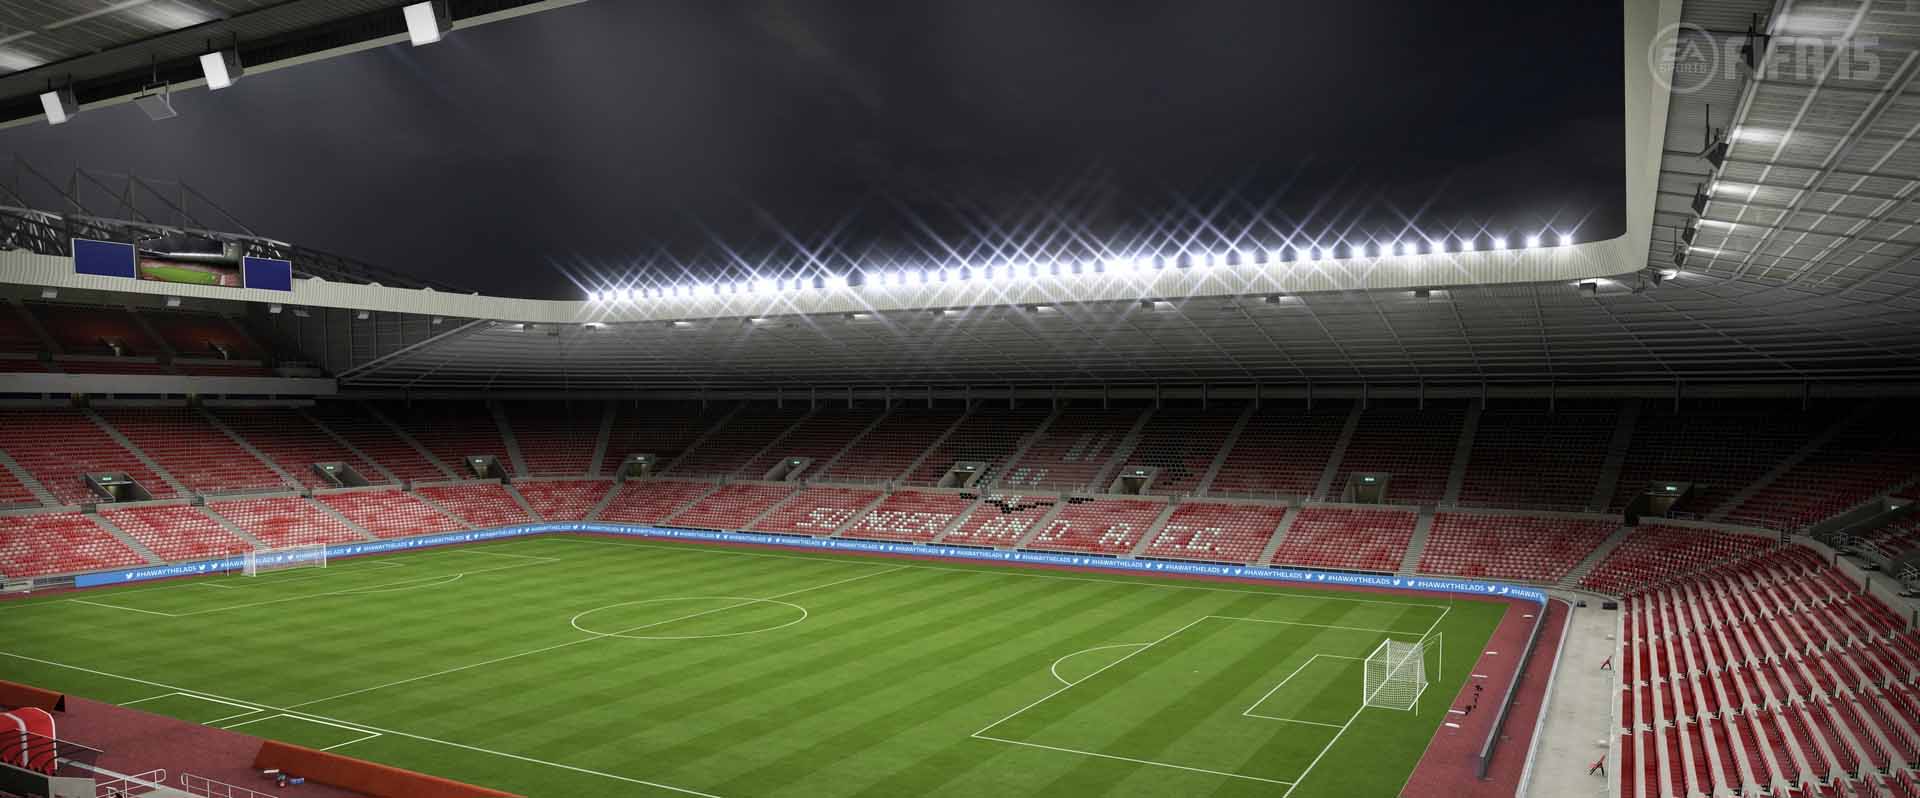 FIFA 15 features all the Barclays Premier League Stadiums